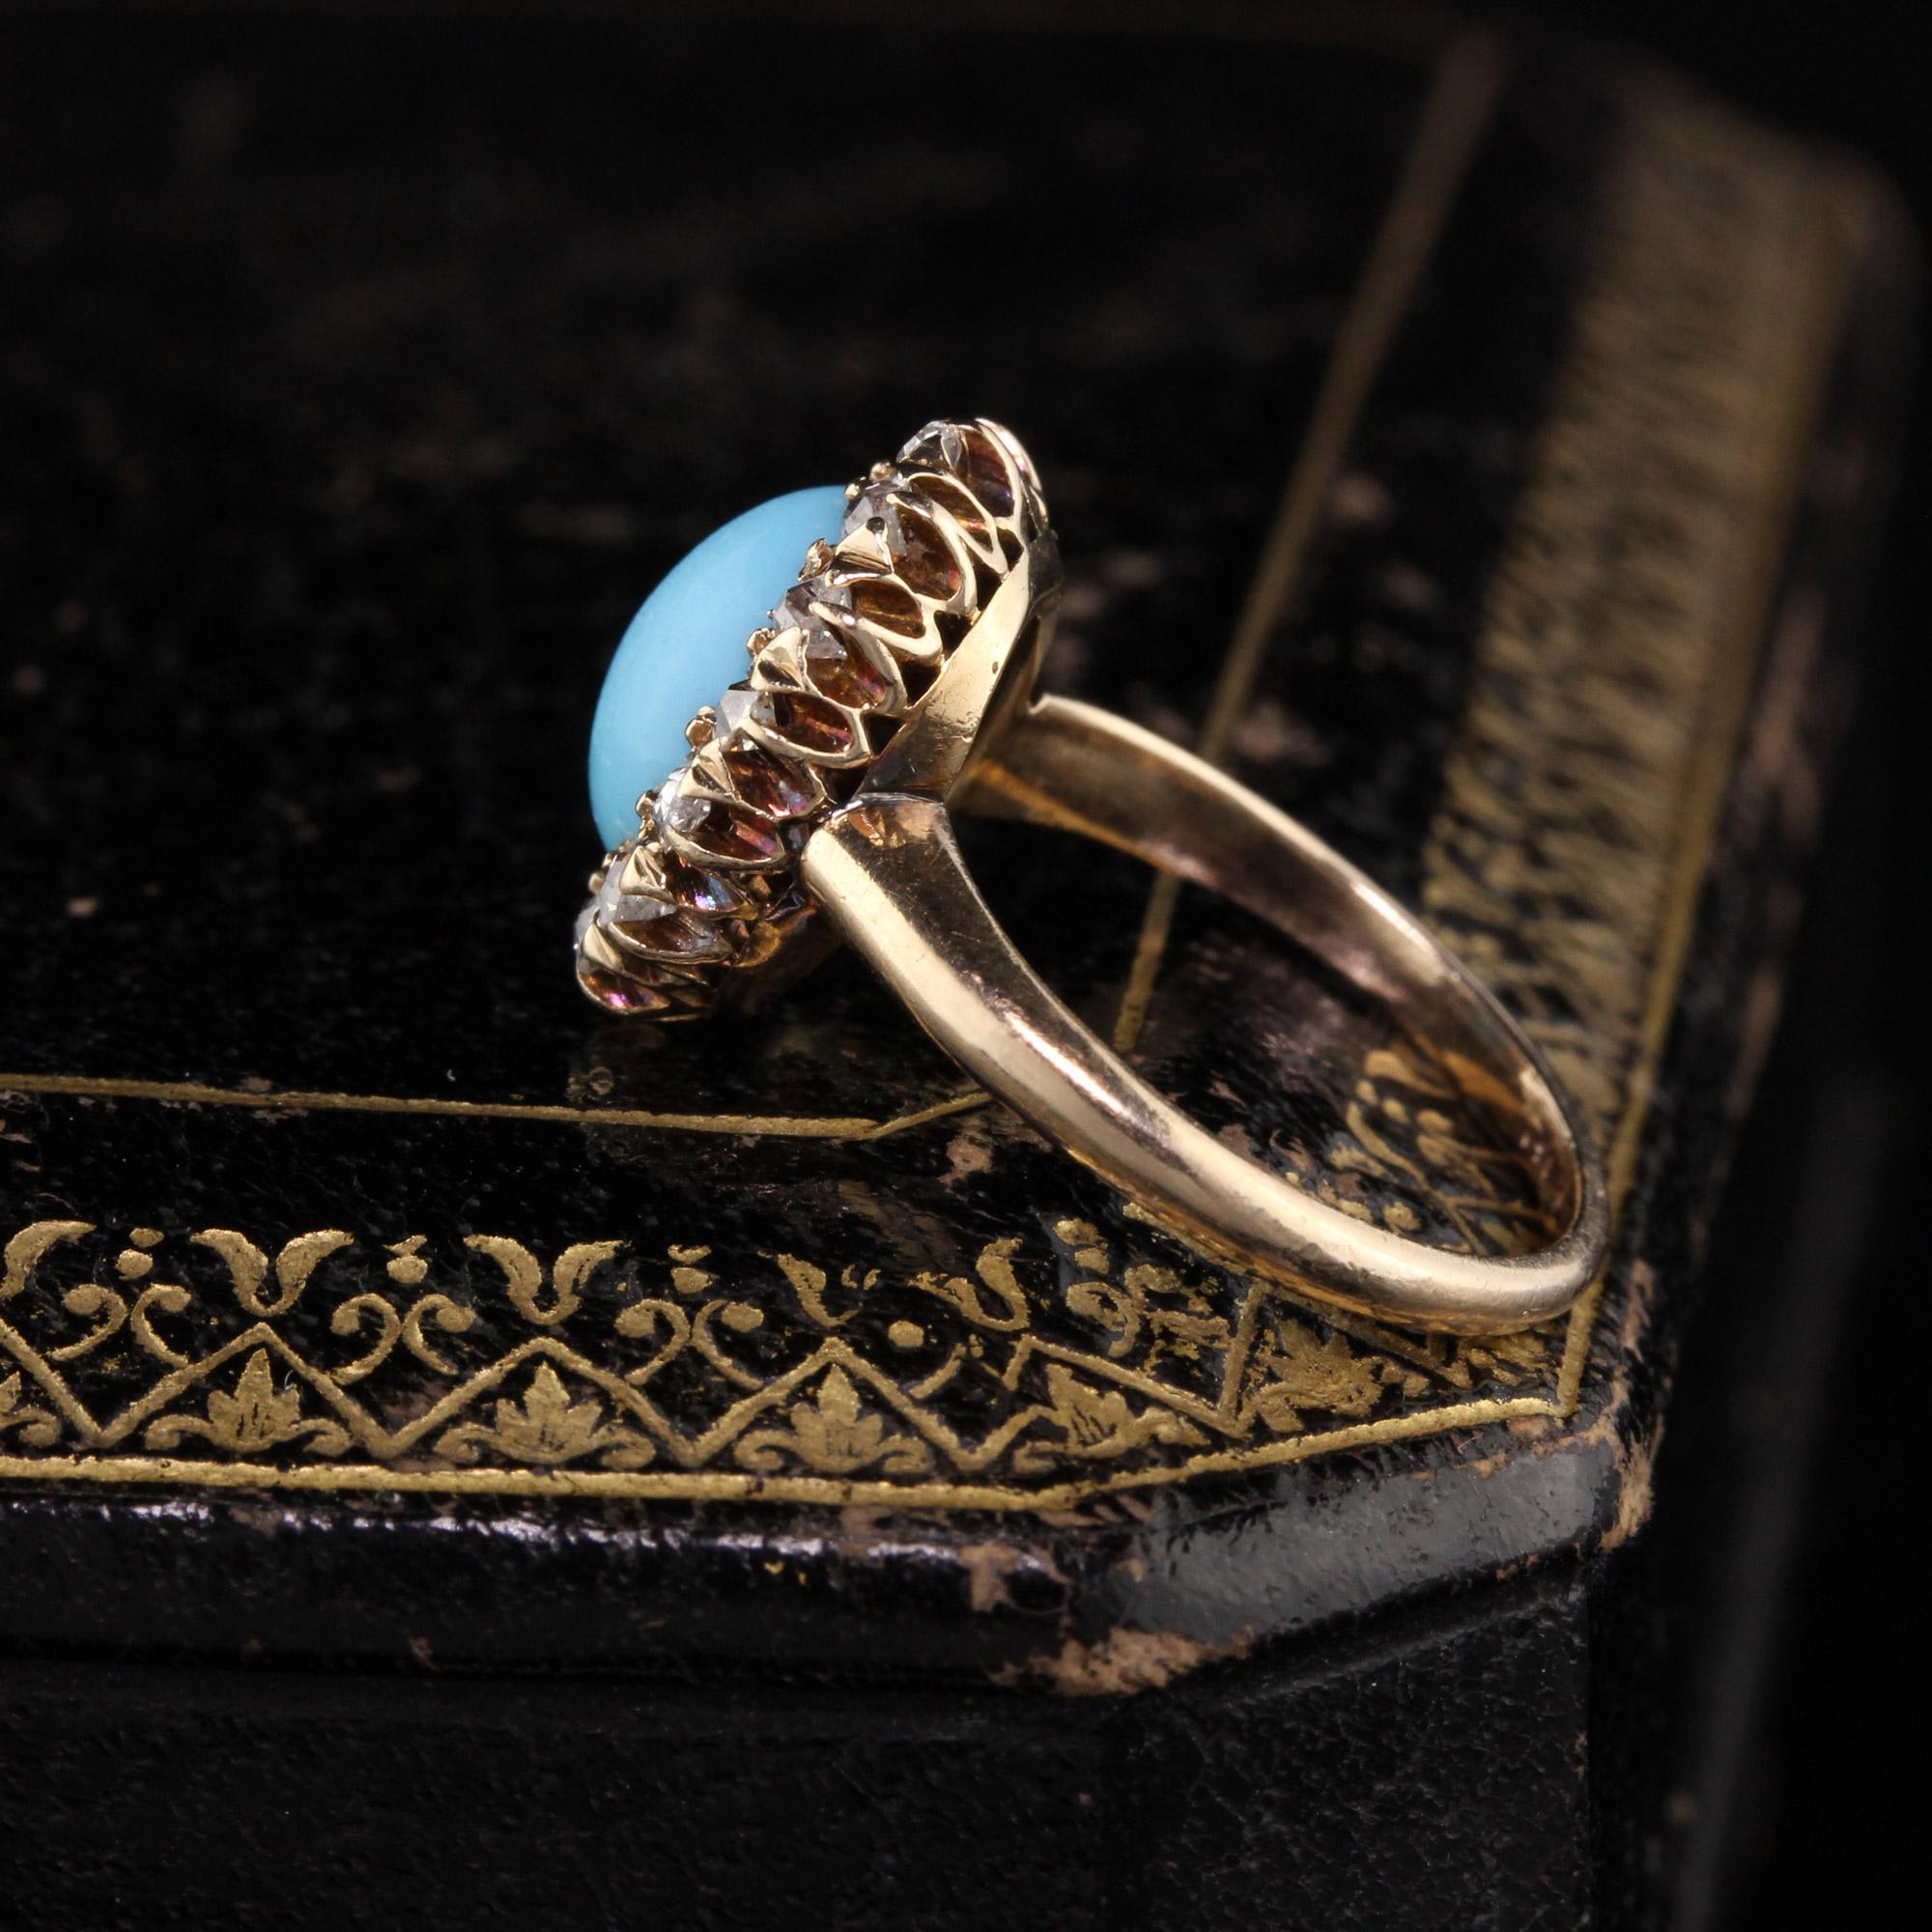 Stunning Victorian ring with a very pretty Turquoise stone in the center surrounded by old mine cut diamonds. 

Item #R0501

Metal: 14K Rose Gold

Weight: 2.5 Grams

Total Diamond Weight: Approximately .45 CT’s

Diamond Color: H

Diamond Clarity: